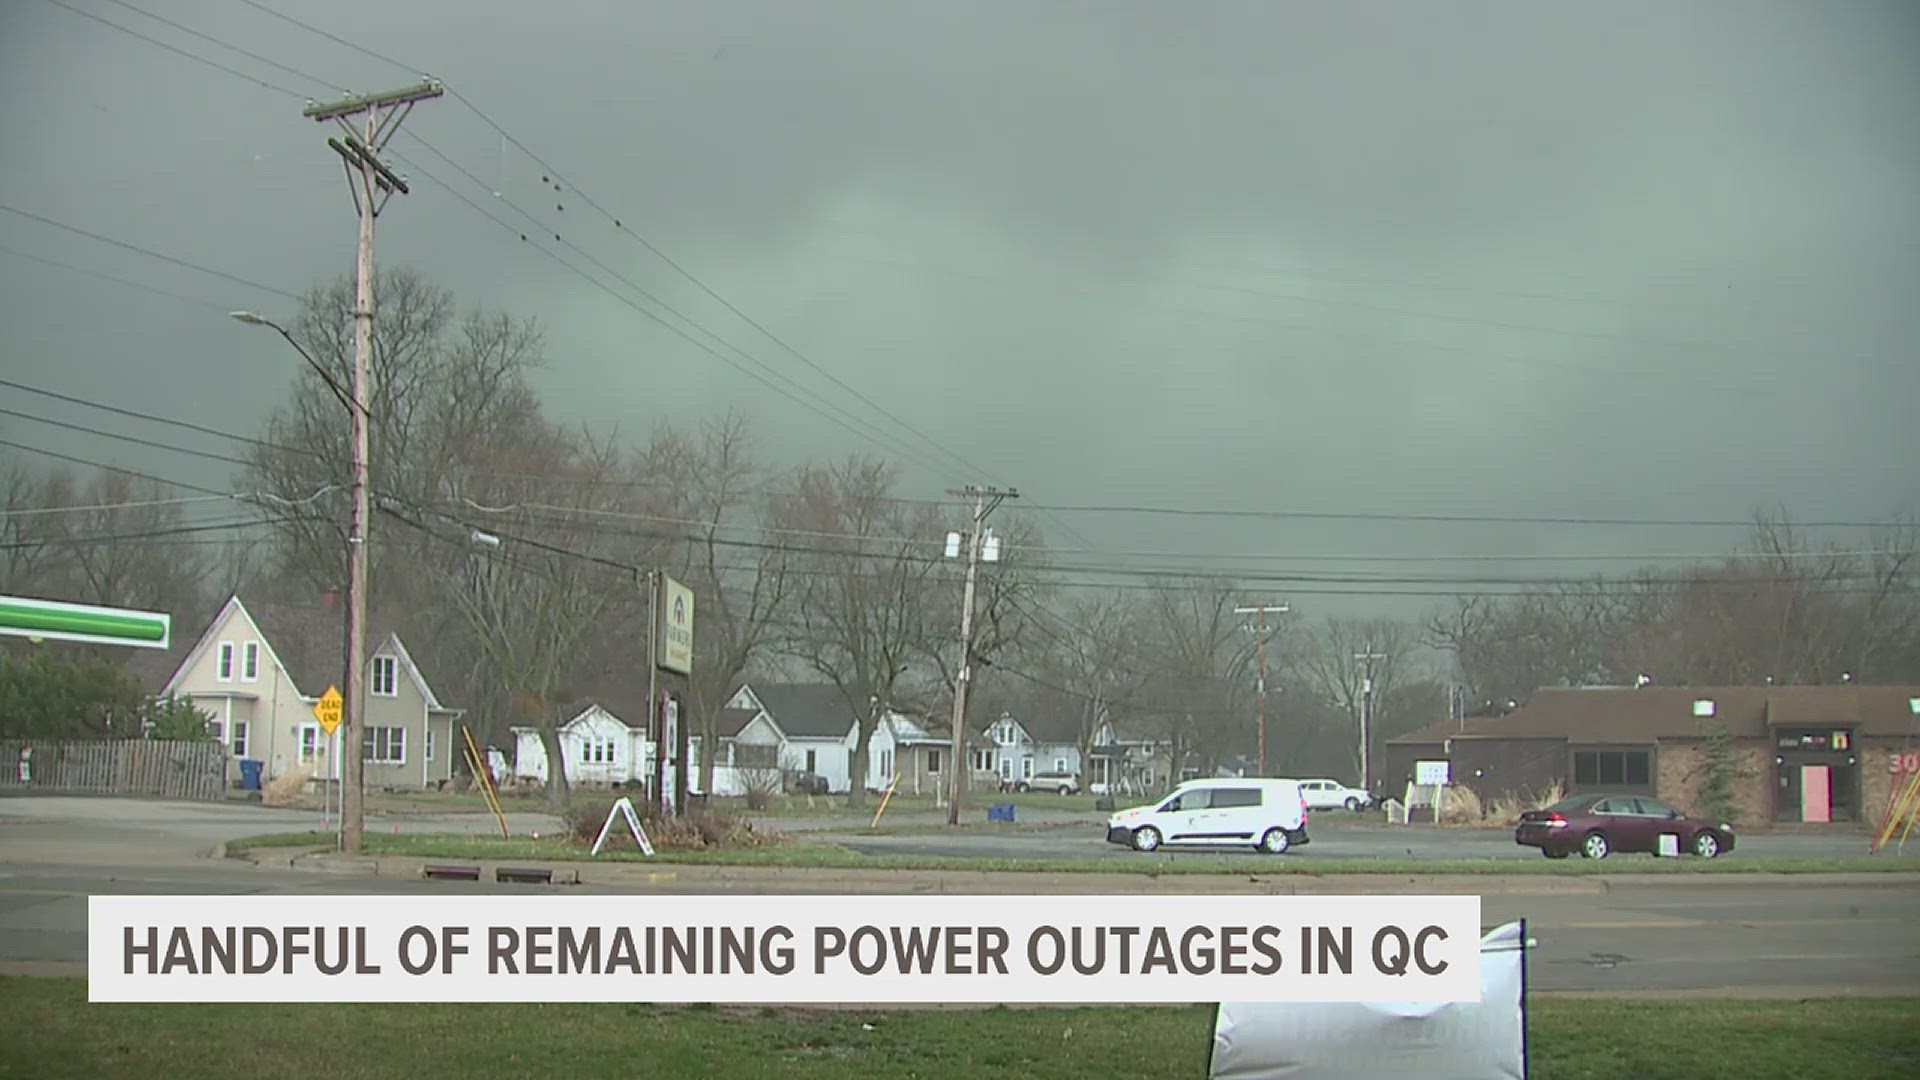 At last check, fewer than 100 Quad Cities homes are without power, and most of those need pole replacements in areas with challenging access.